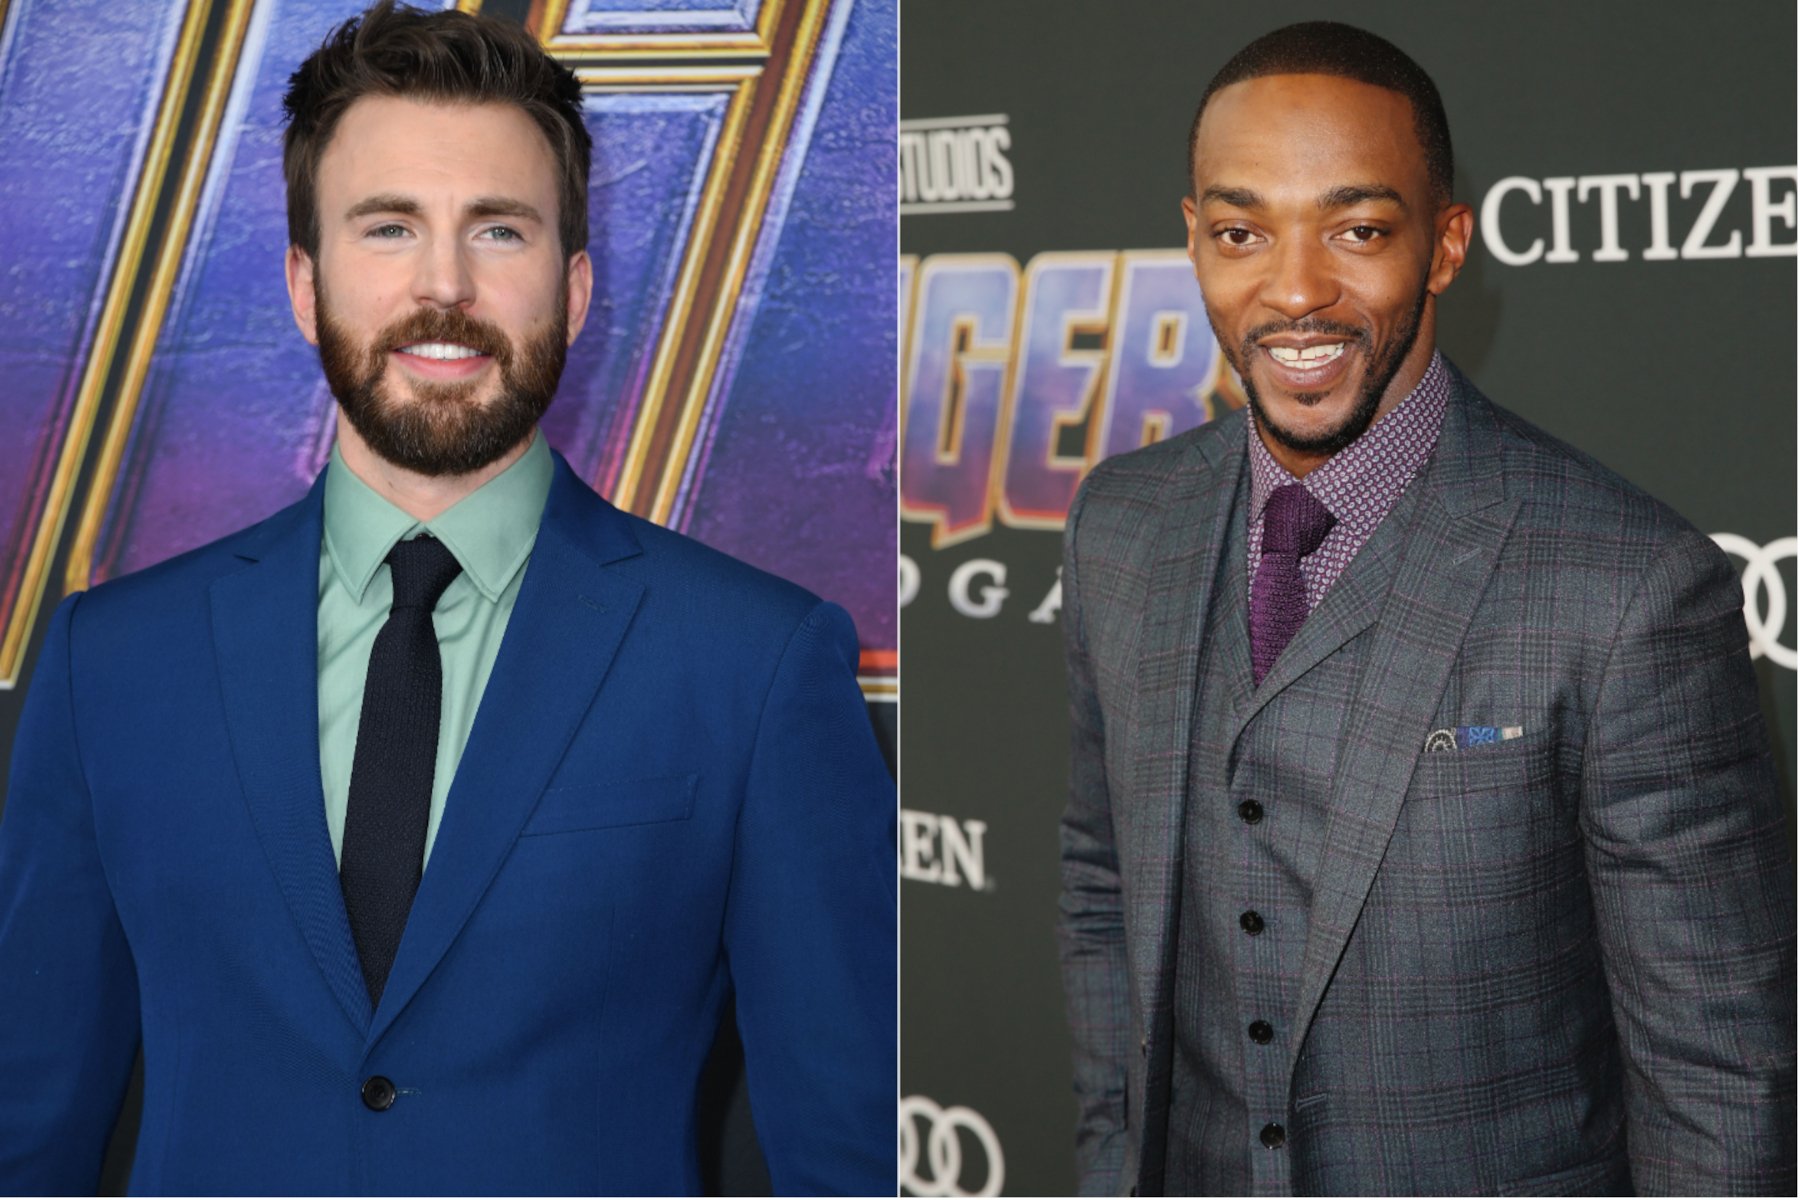 Captain America actors Chris Evans and Anthony Mackie. In the left image, Evans is wearing a light green shirt, blue suit, and black tie. In the right image, Mackie is wearing a purple shirt and tie and gray suit.